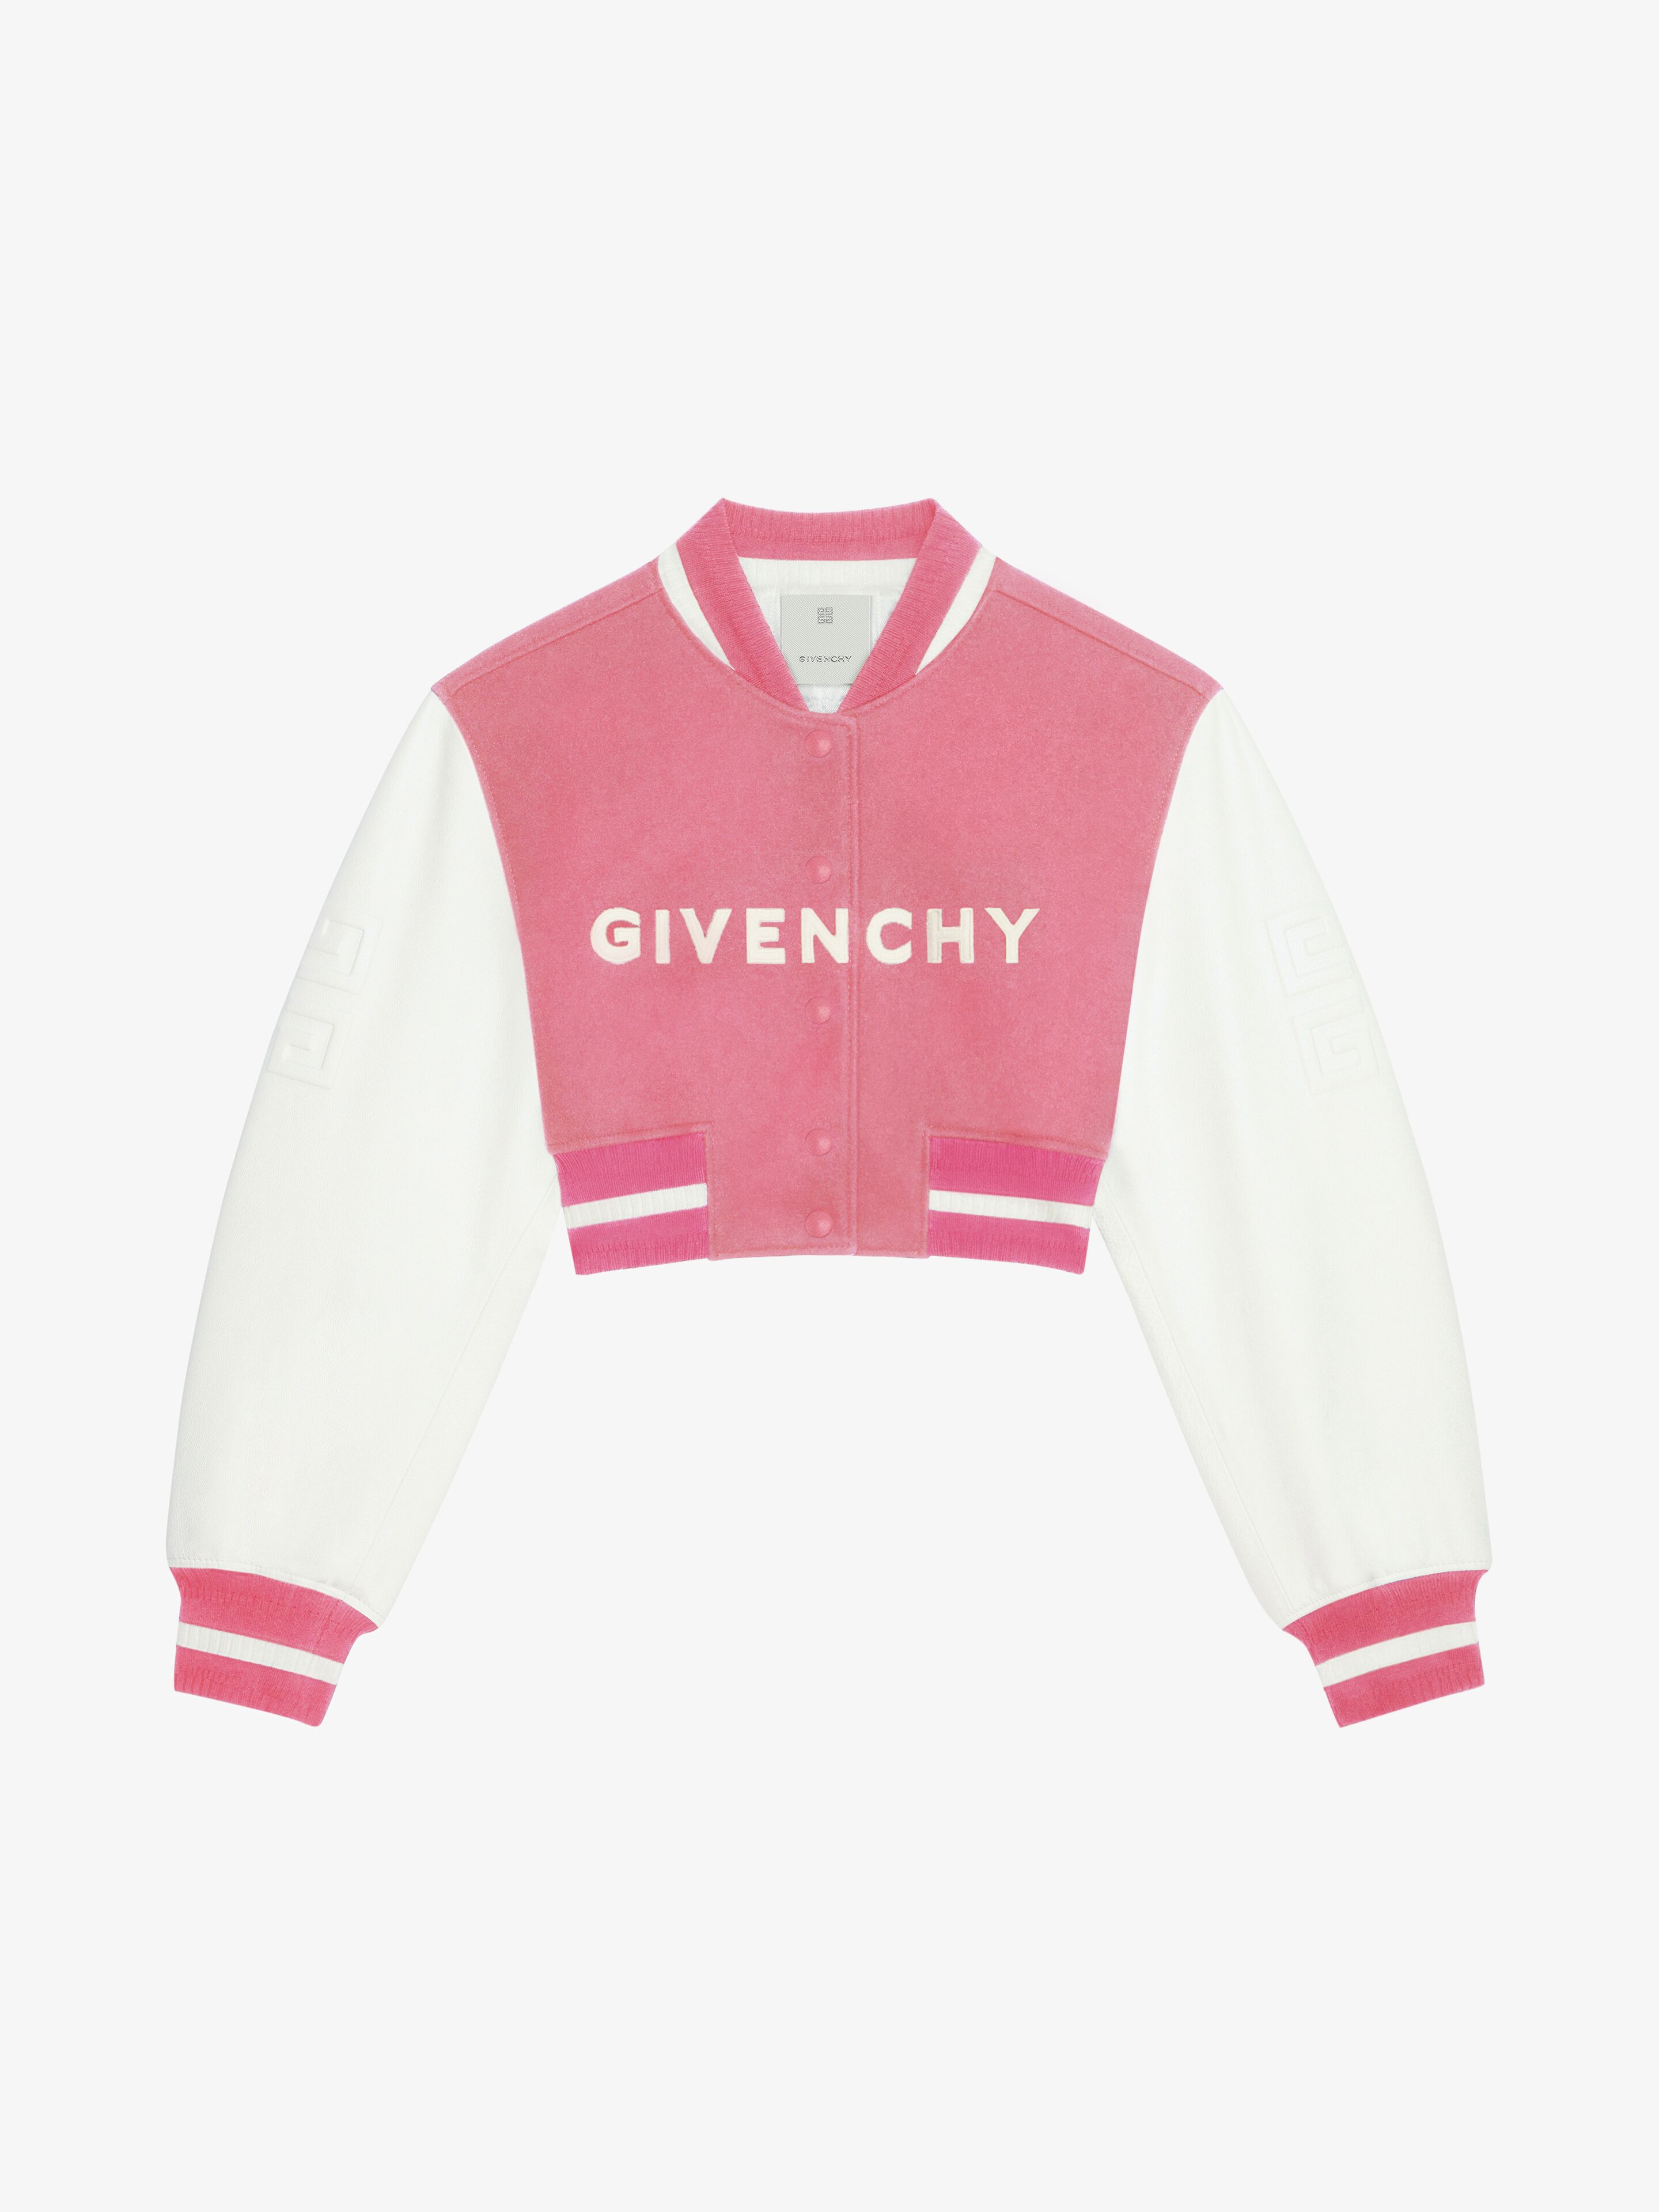 Givenchy Women's Cropped Varsity Jacket In Wool And Leather In Pink White